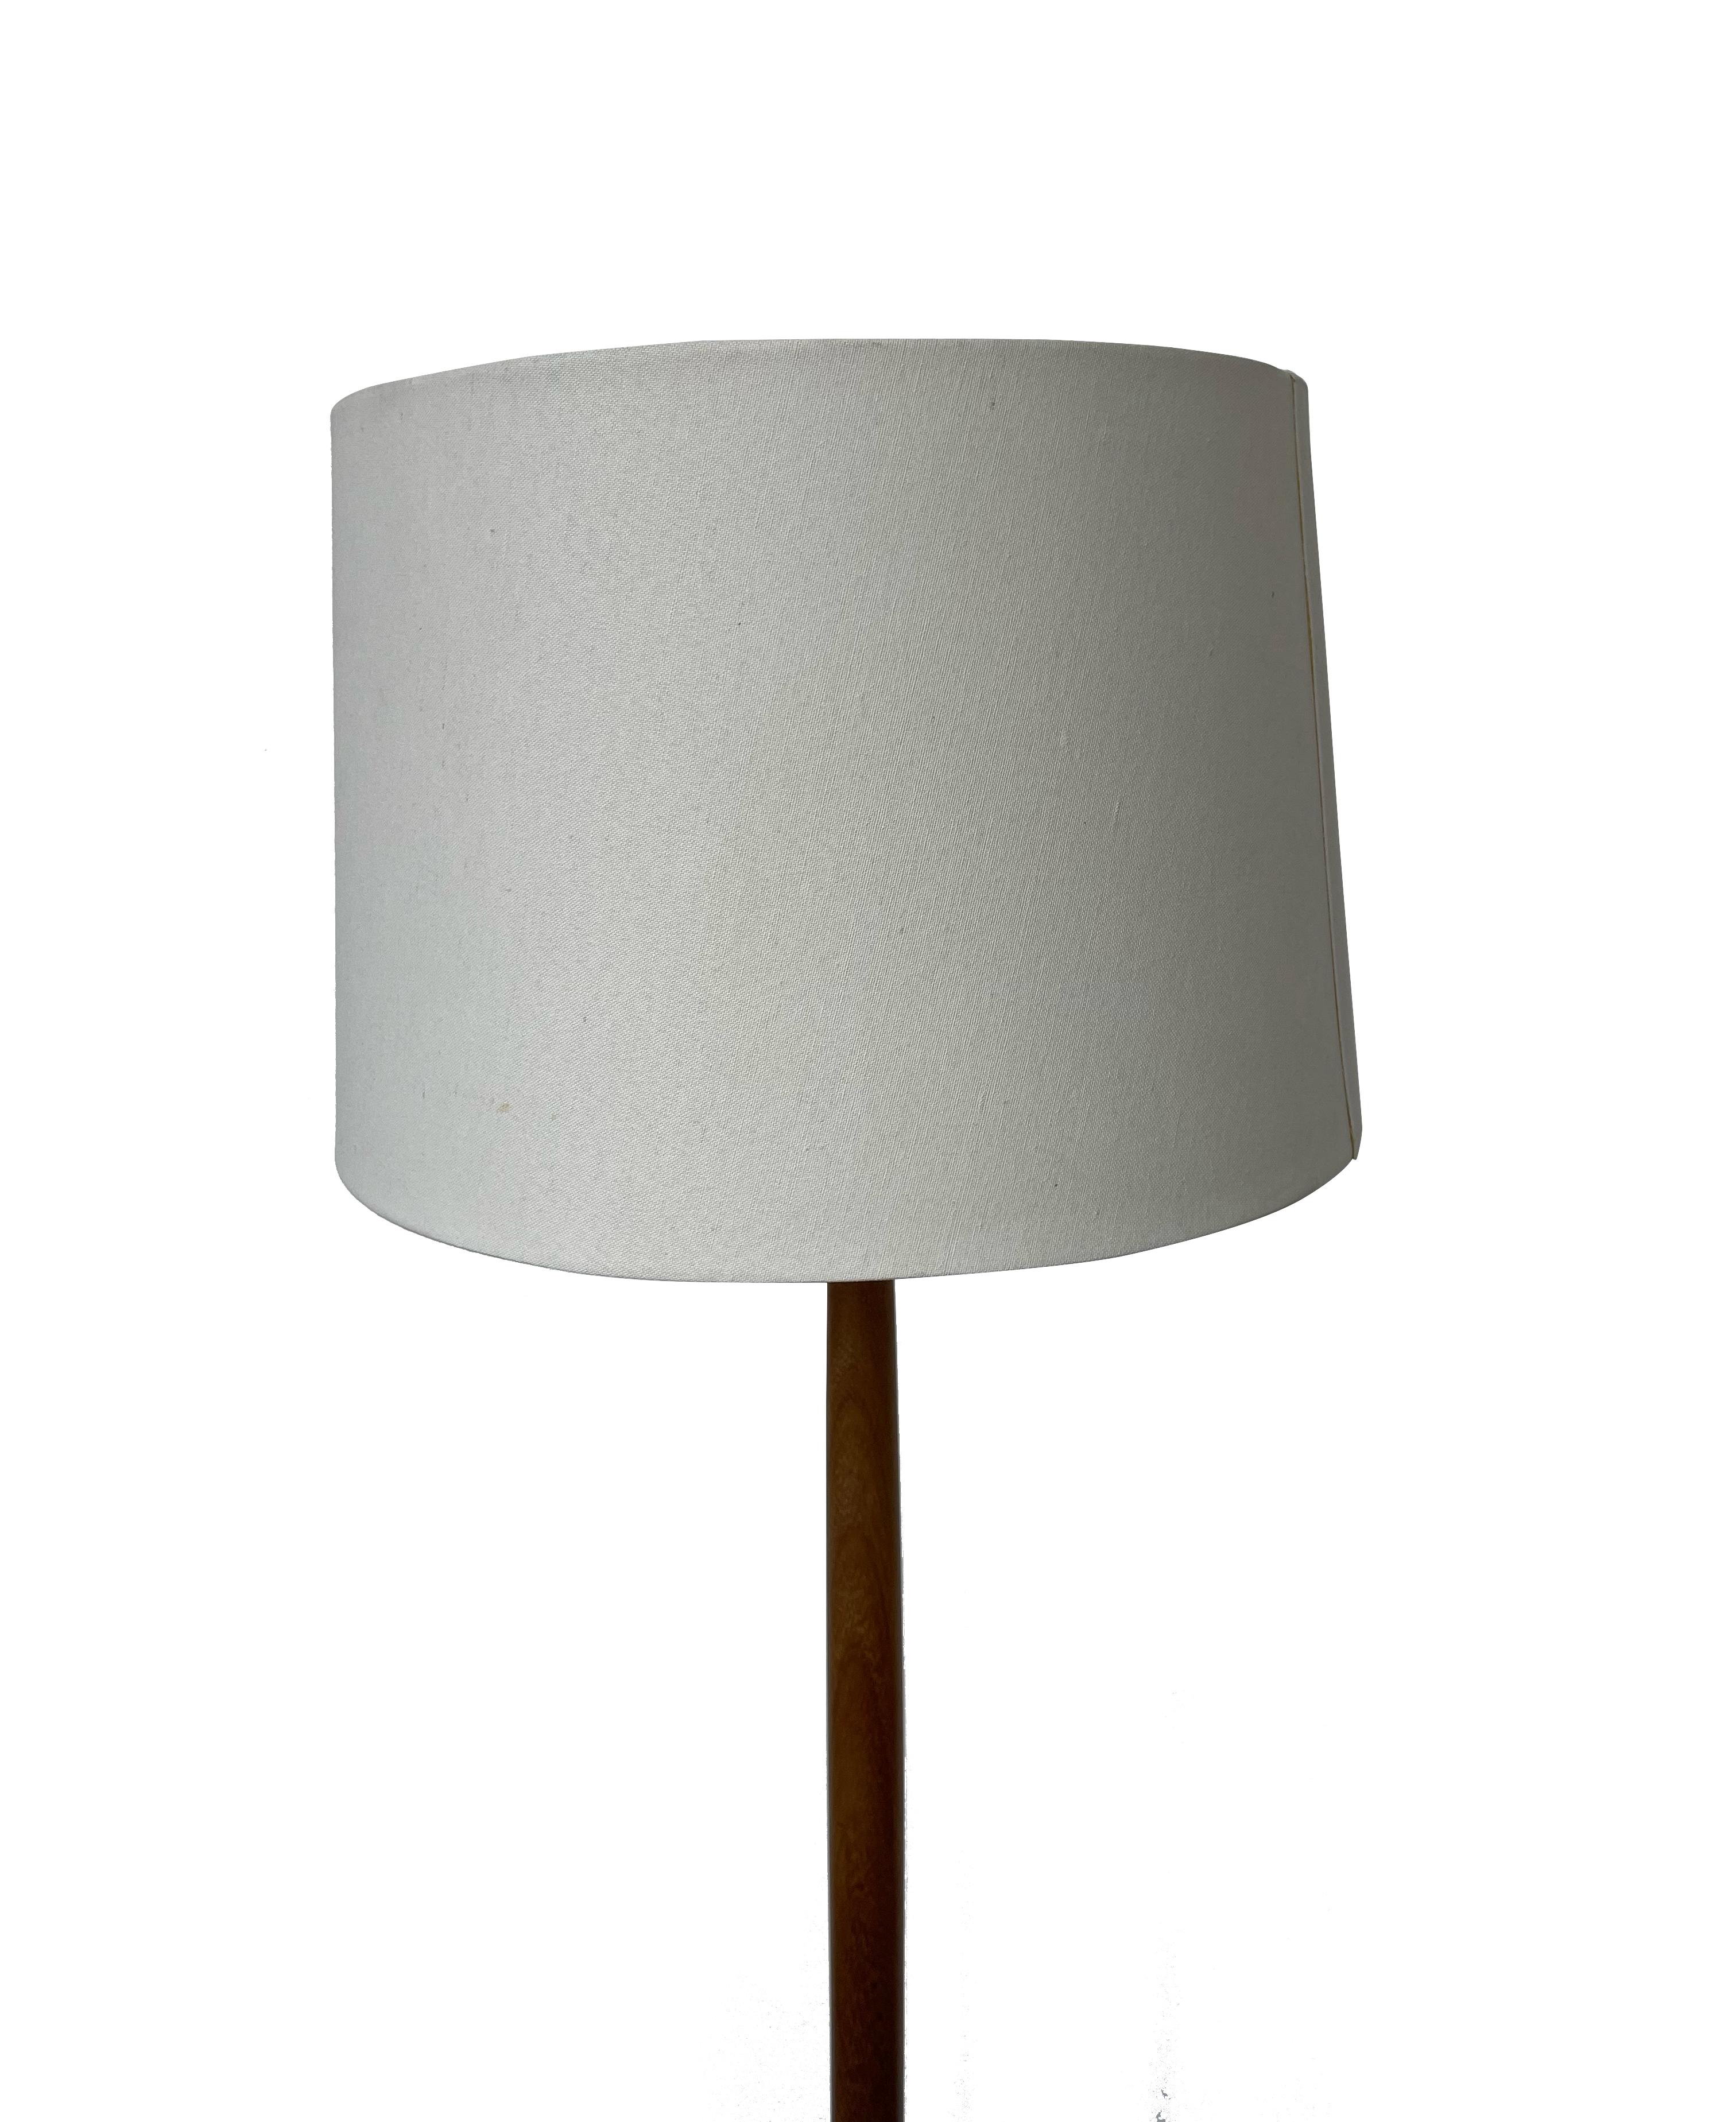 A stunning Vintage Danish Mid-Century Modern Onion Teak Floor Lamp by Basic Concept Lightolier. Crafted with teak wood, this floor lamp exudes a timeless charm that seamlessly blends with various interior styles.